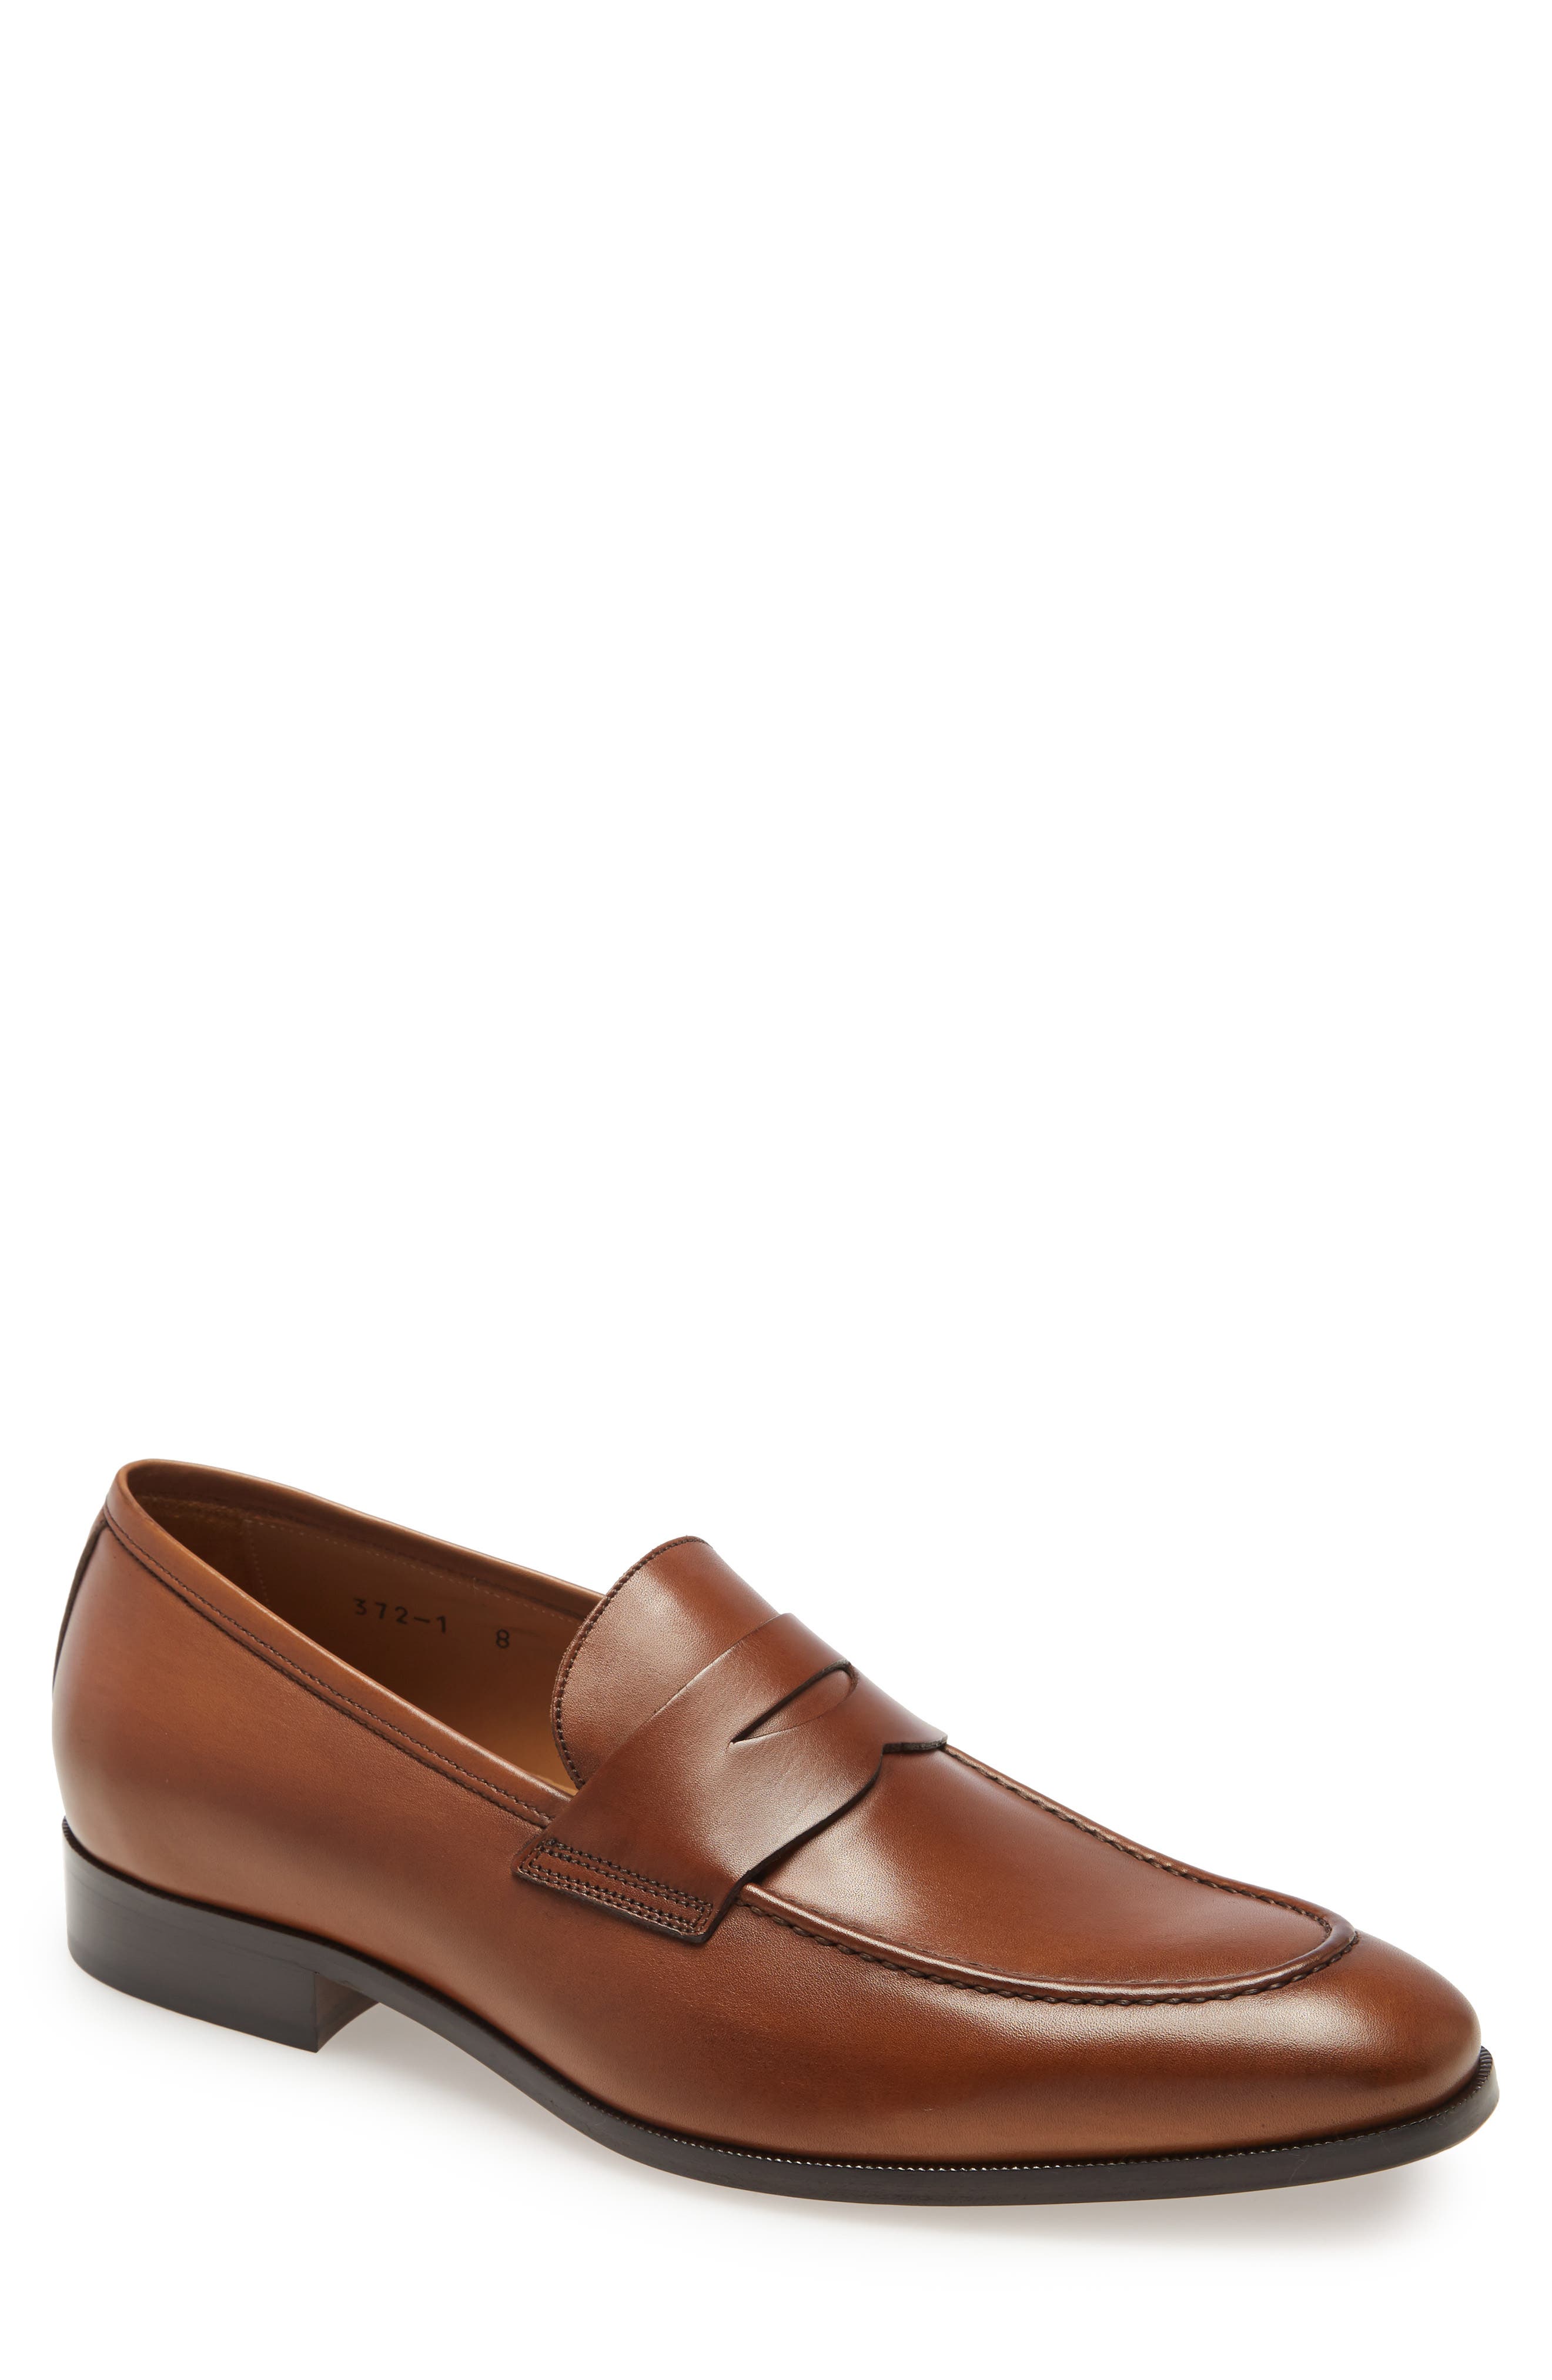 to boot new york loafers sale